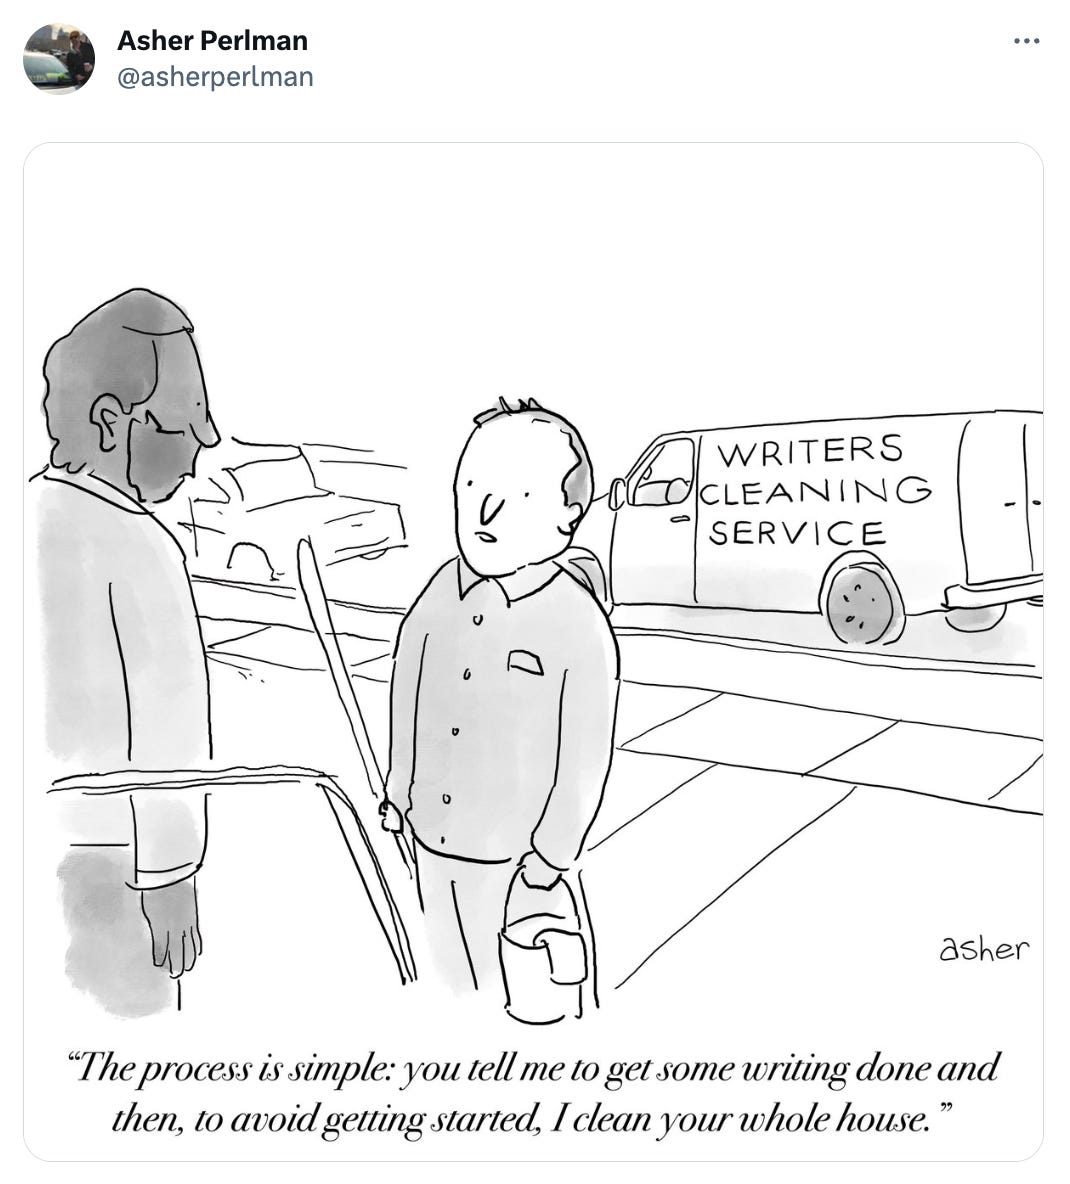 A cartoon from Asher Perlman -- a man is at the front stoop of another man in front of a van reading "Writers Cleaning Service". The caption reads, "The process is simple: you tell me to get some writing done and then, to avoid getting started, I clean your whole house."